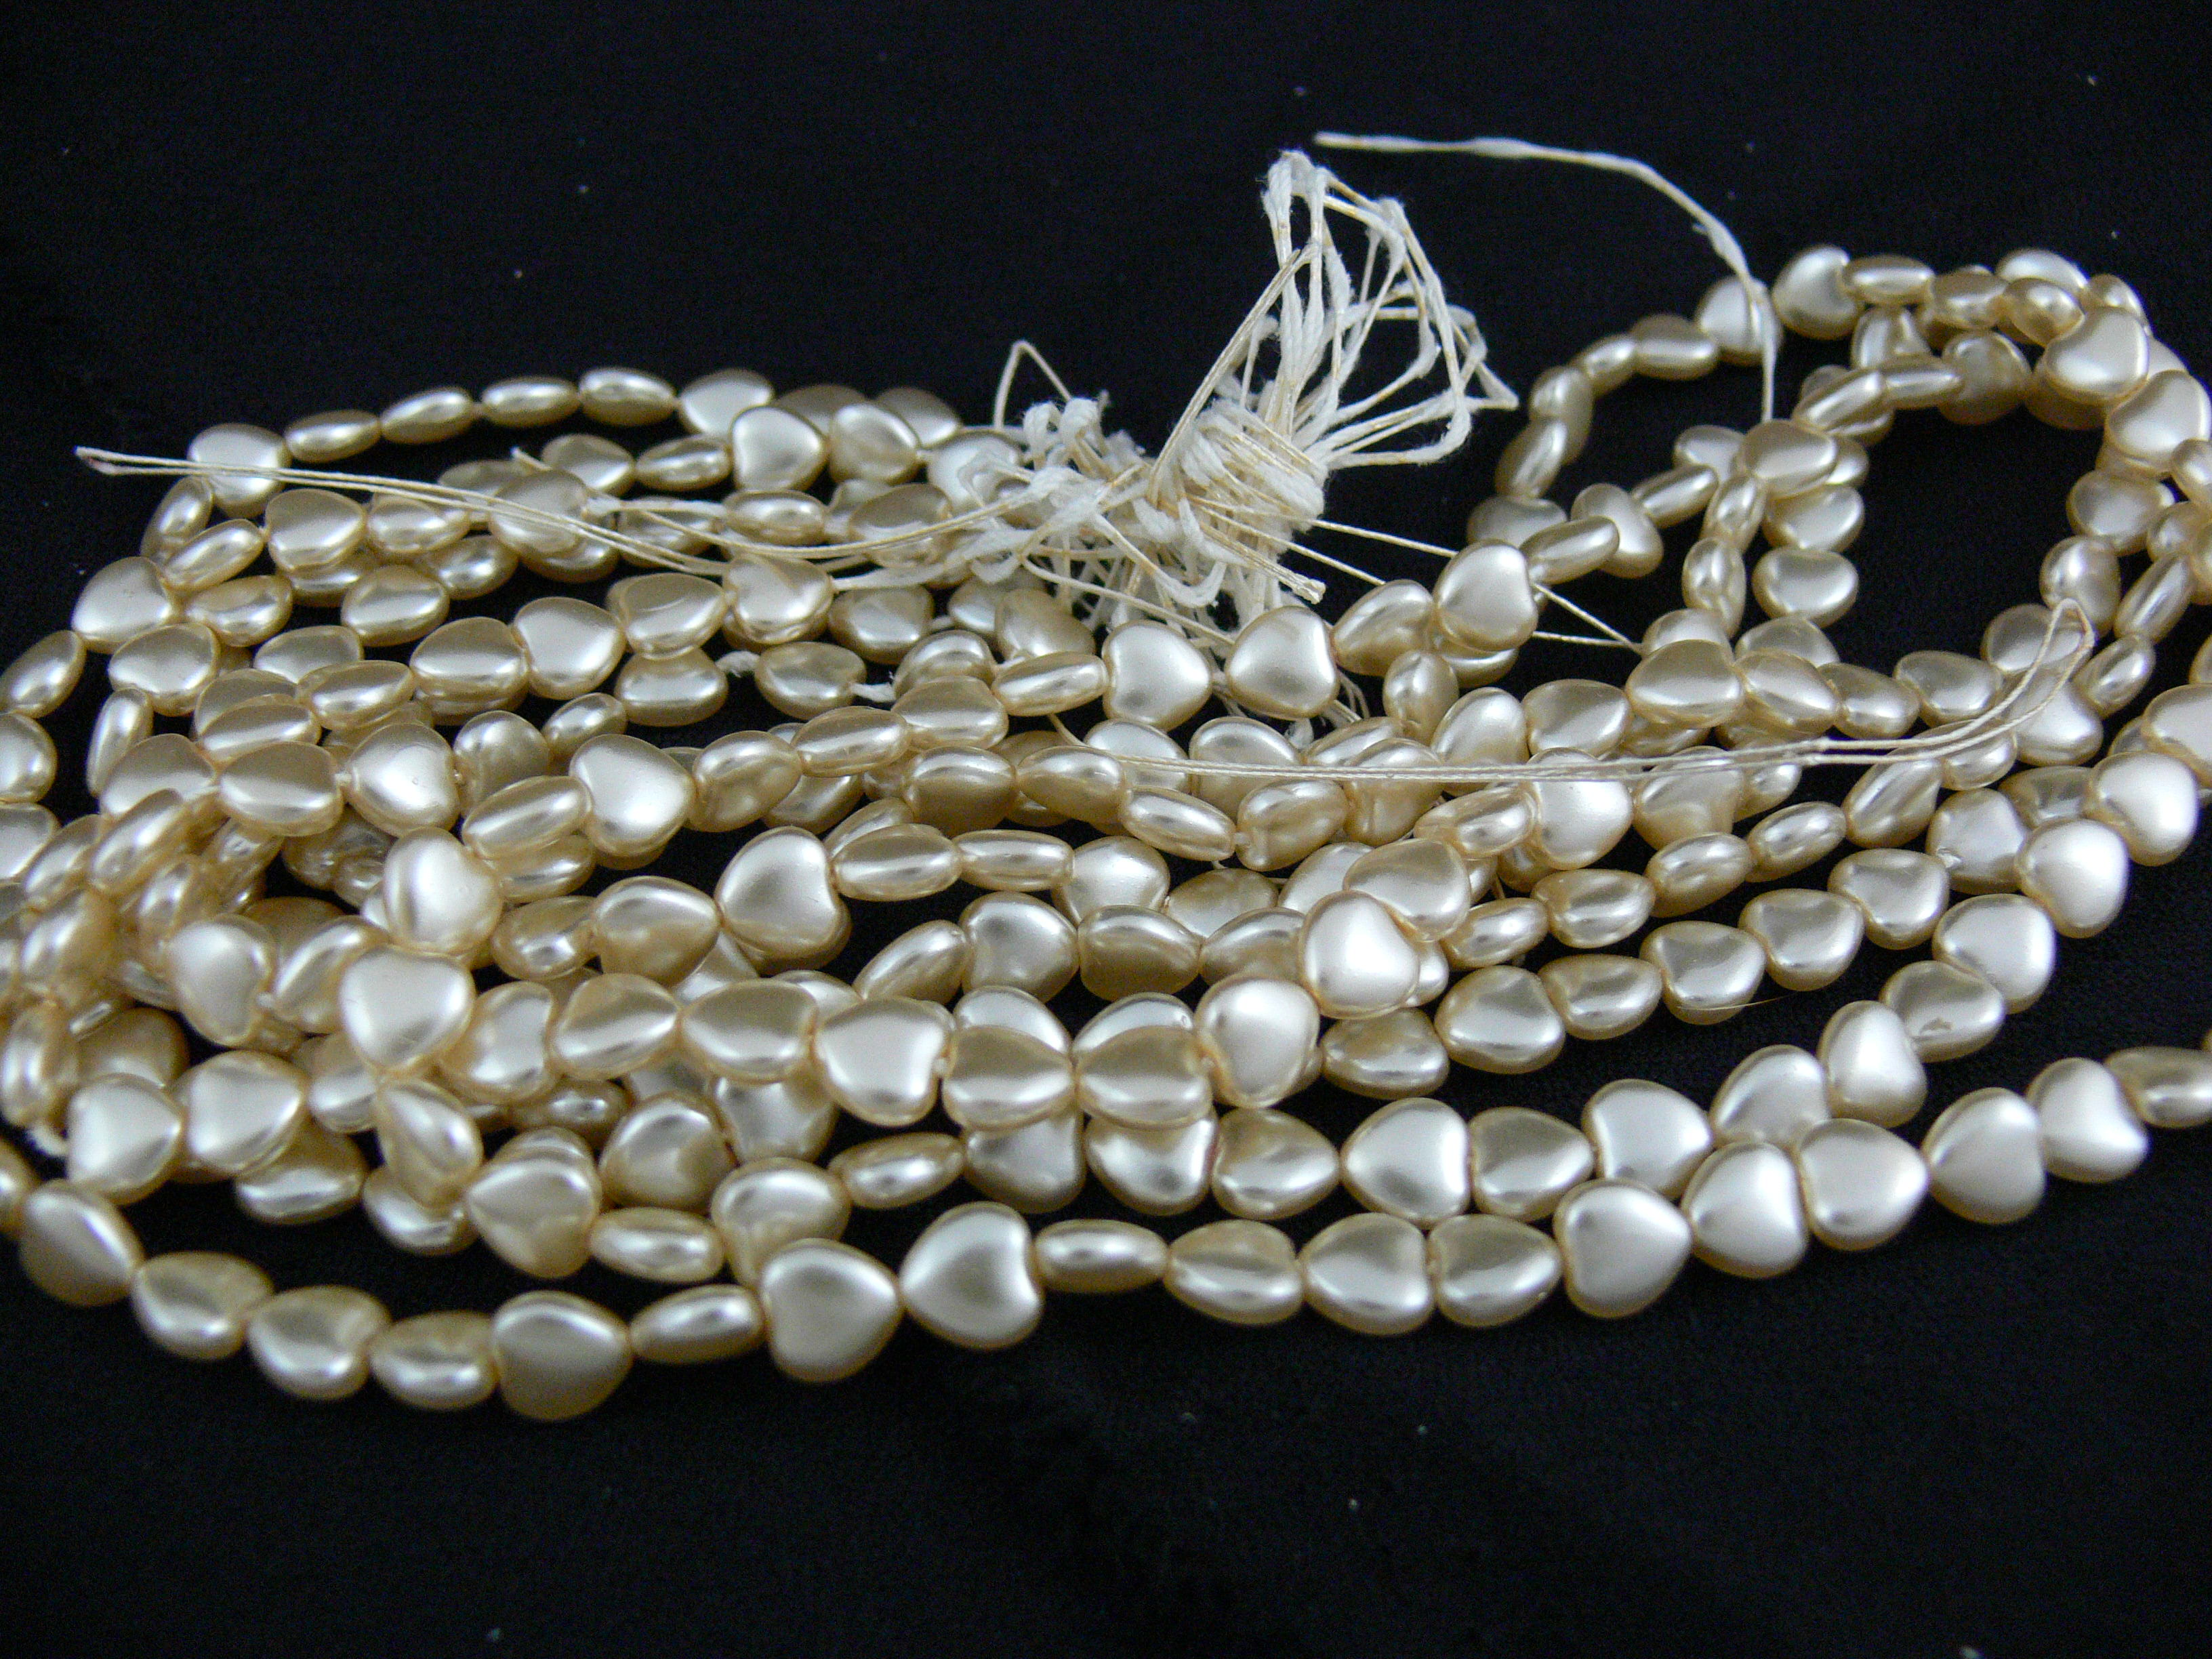 Heart shaped Ivory Pearls